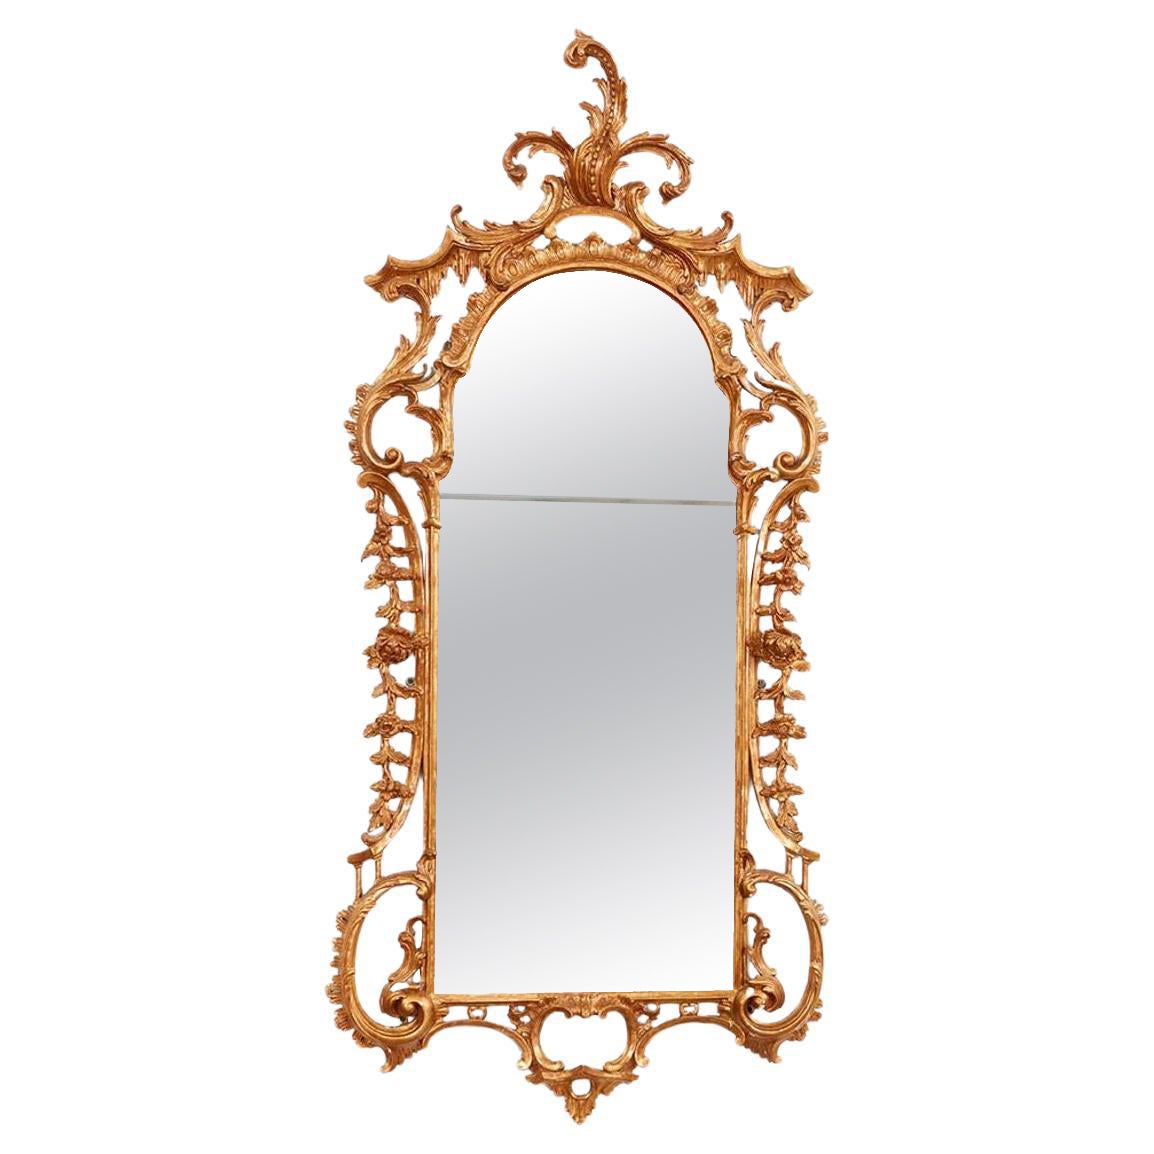 Substantial Georgian Rococo Giltwood Mirror For Sale